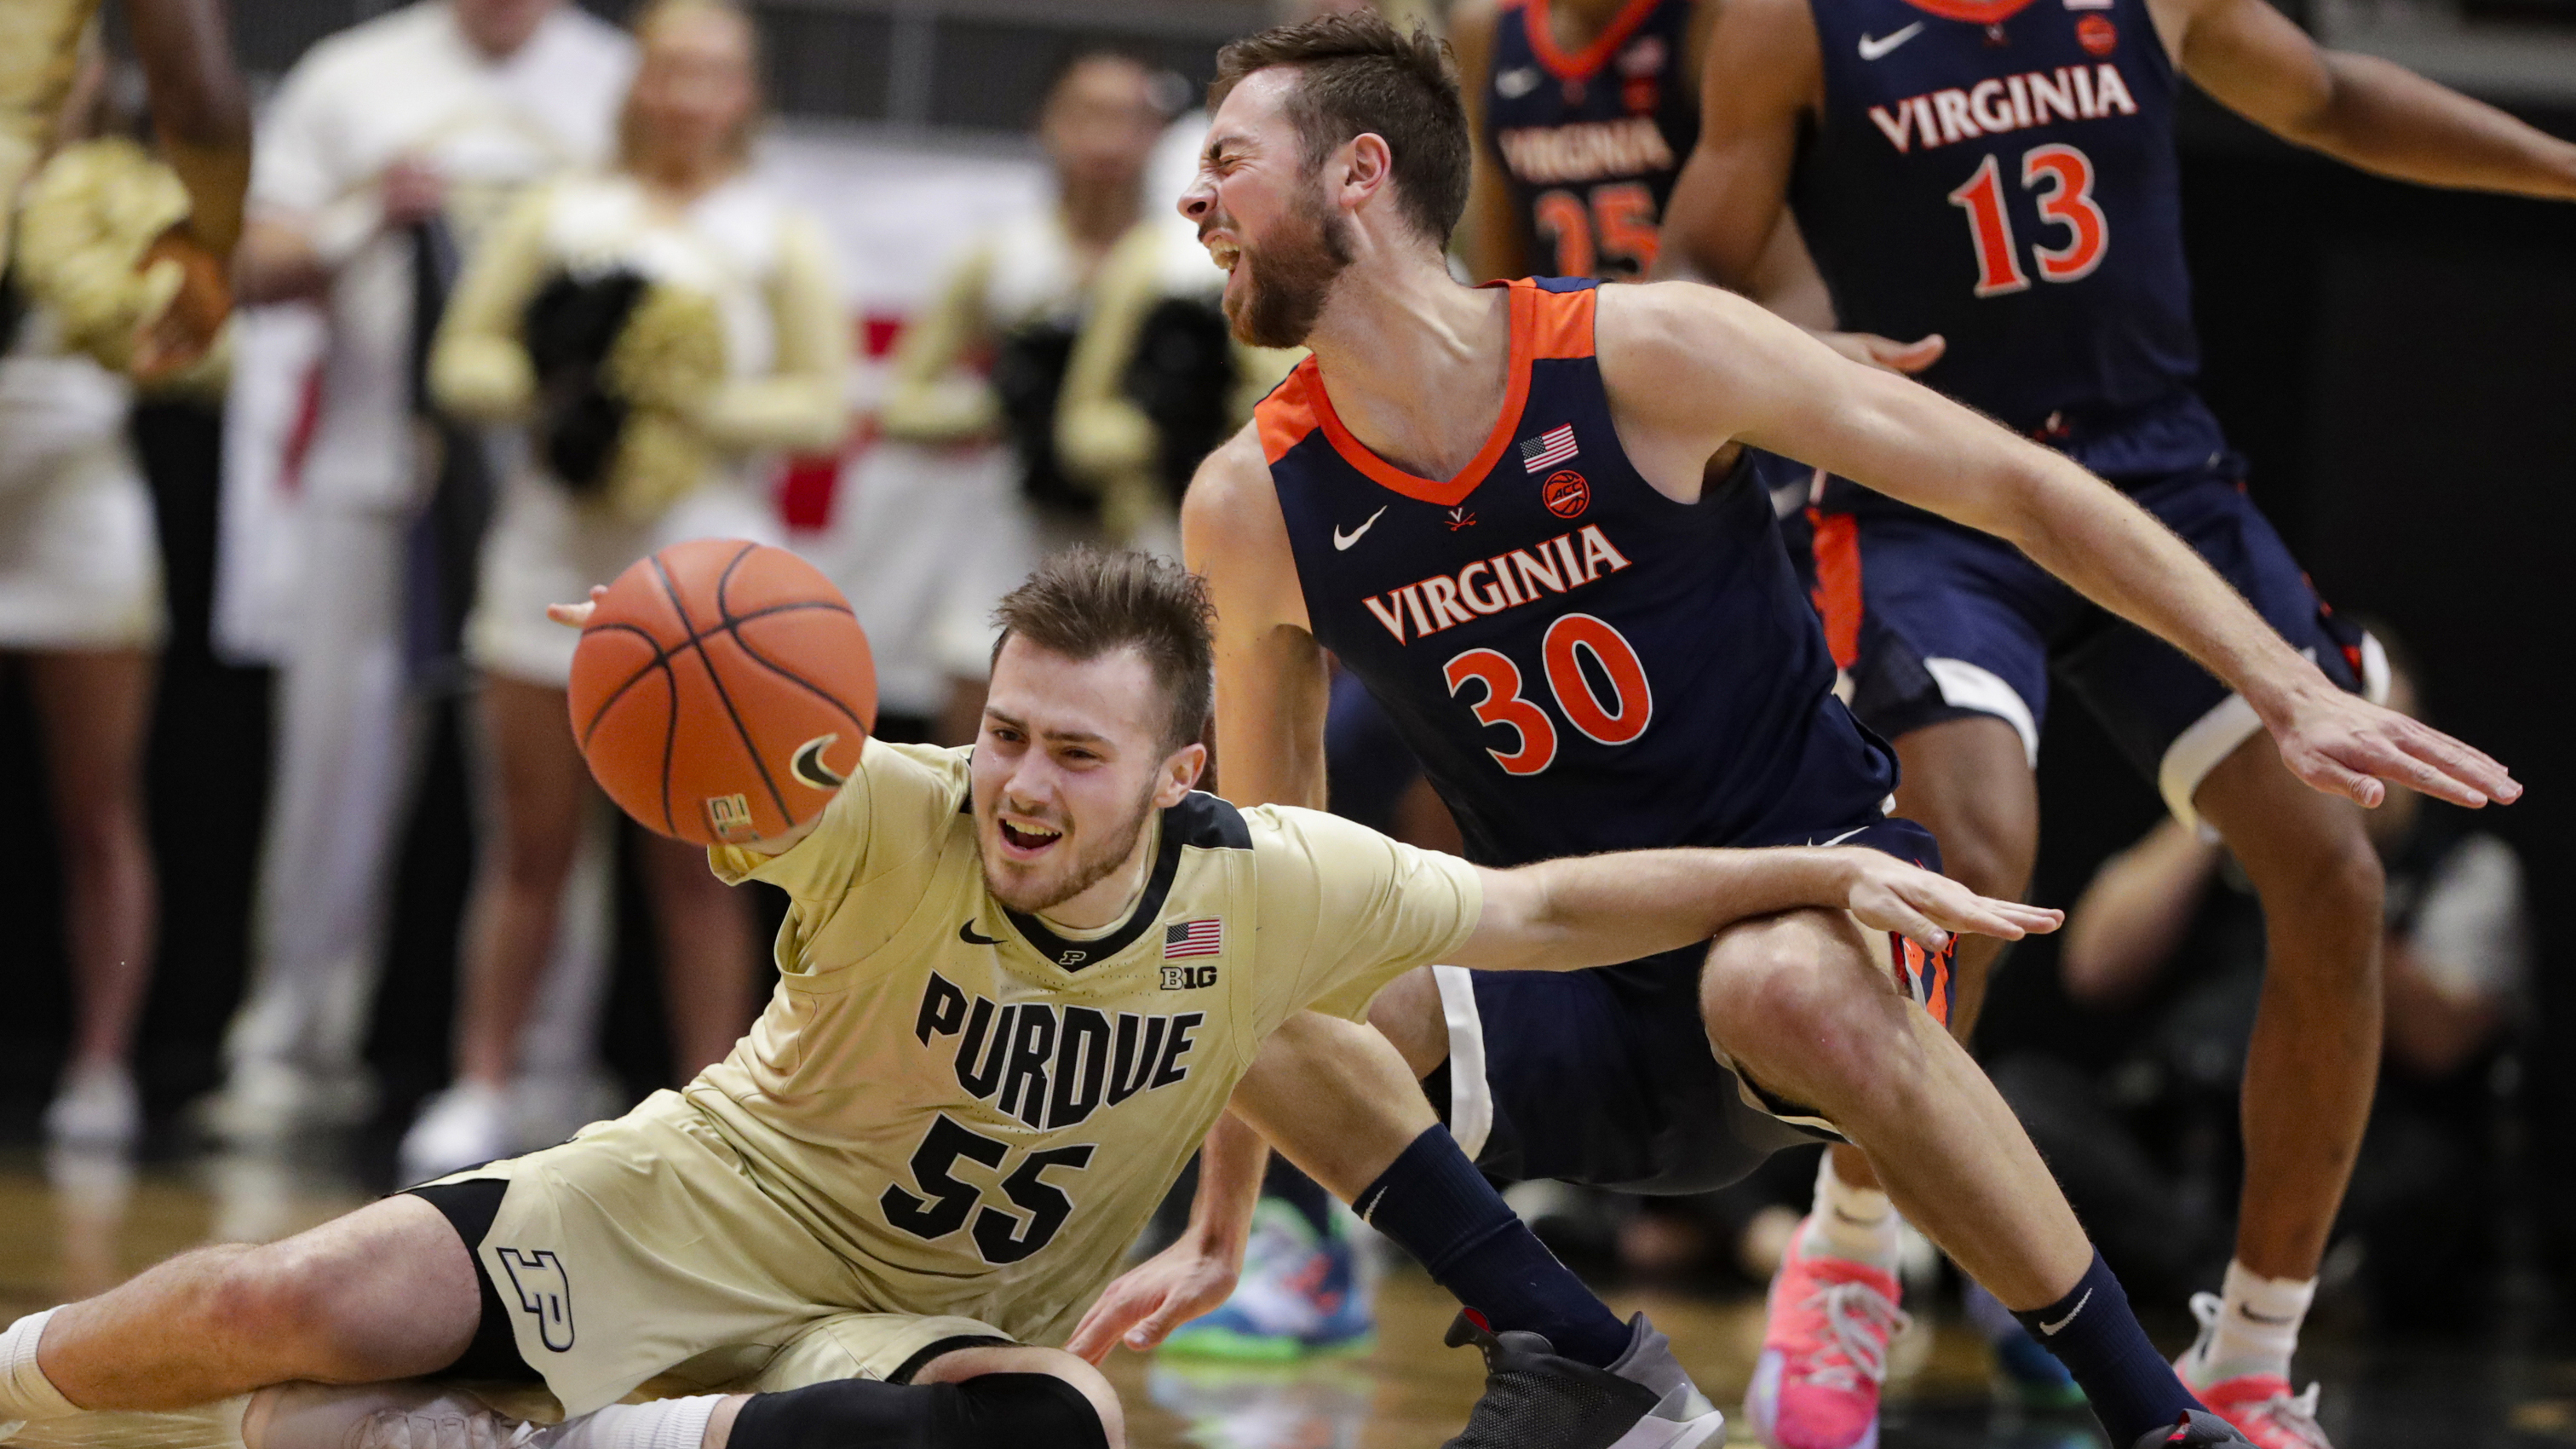 Purdue cruises to 69-40 victory over defending champion Virginia